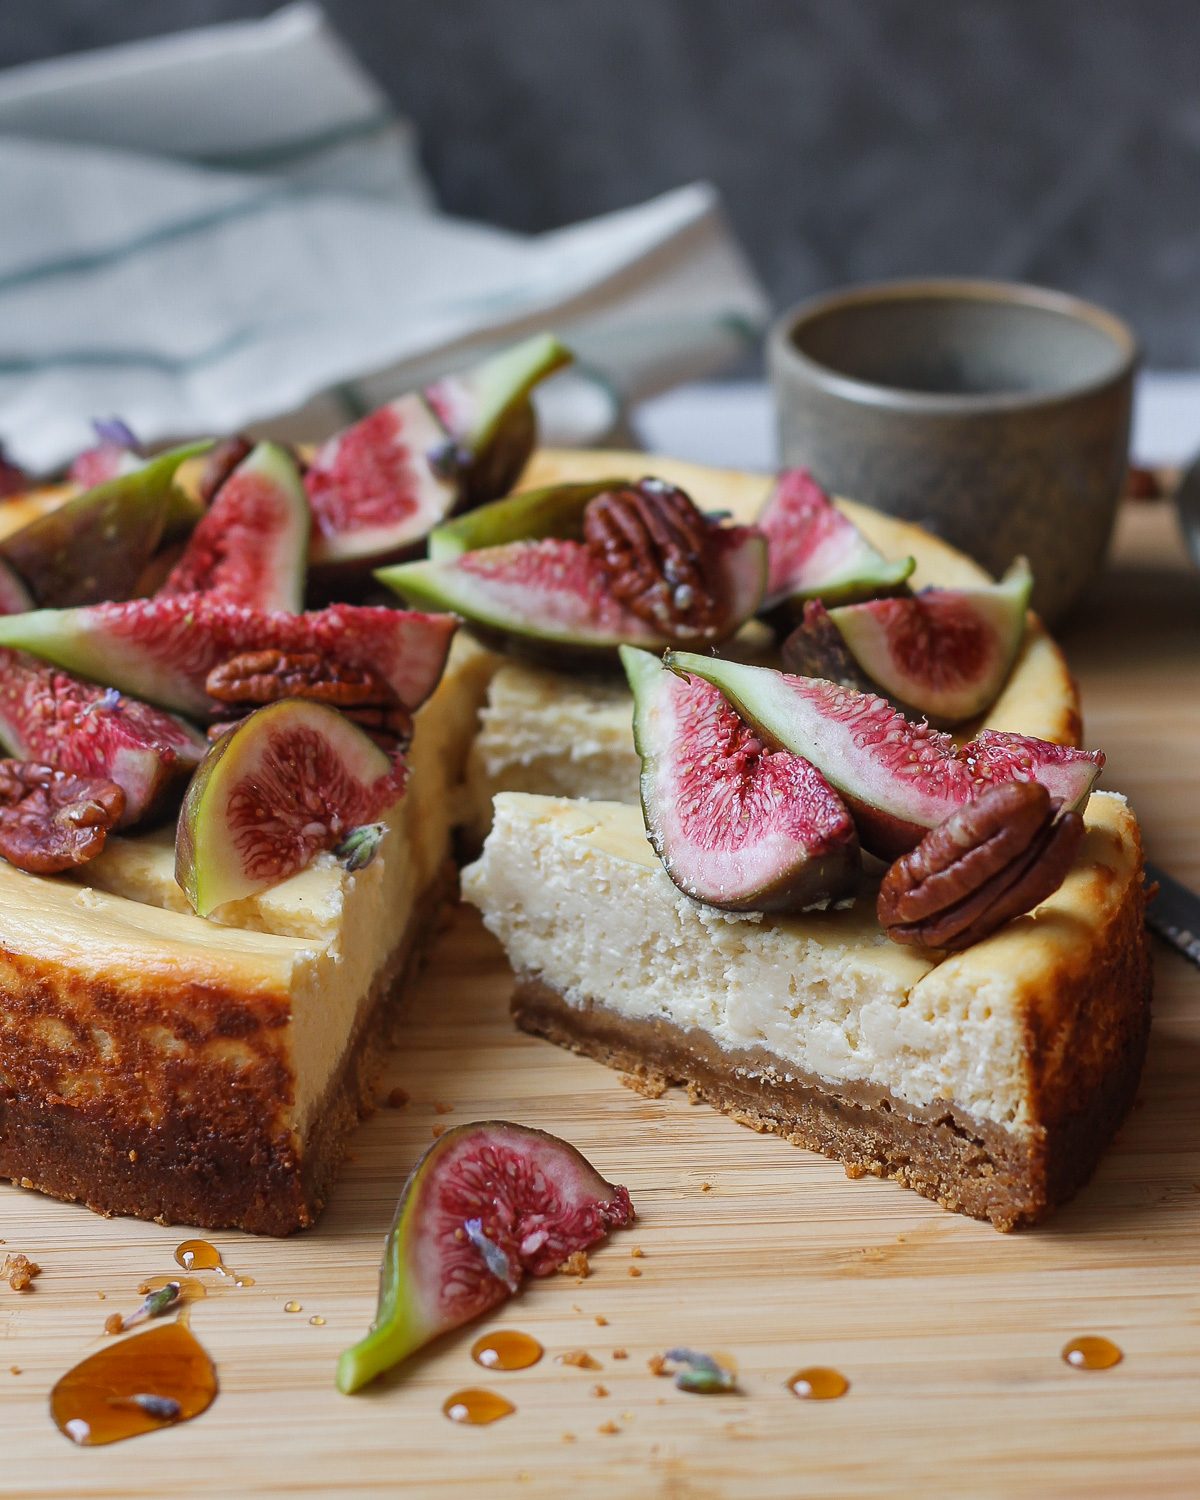 Baked ricotta cheesecake with figs